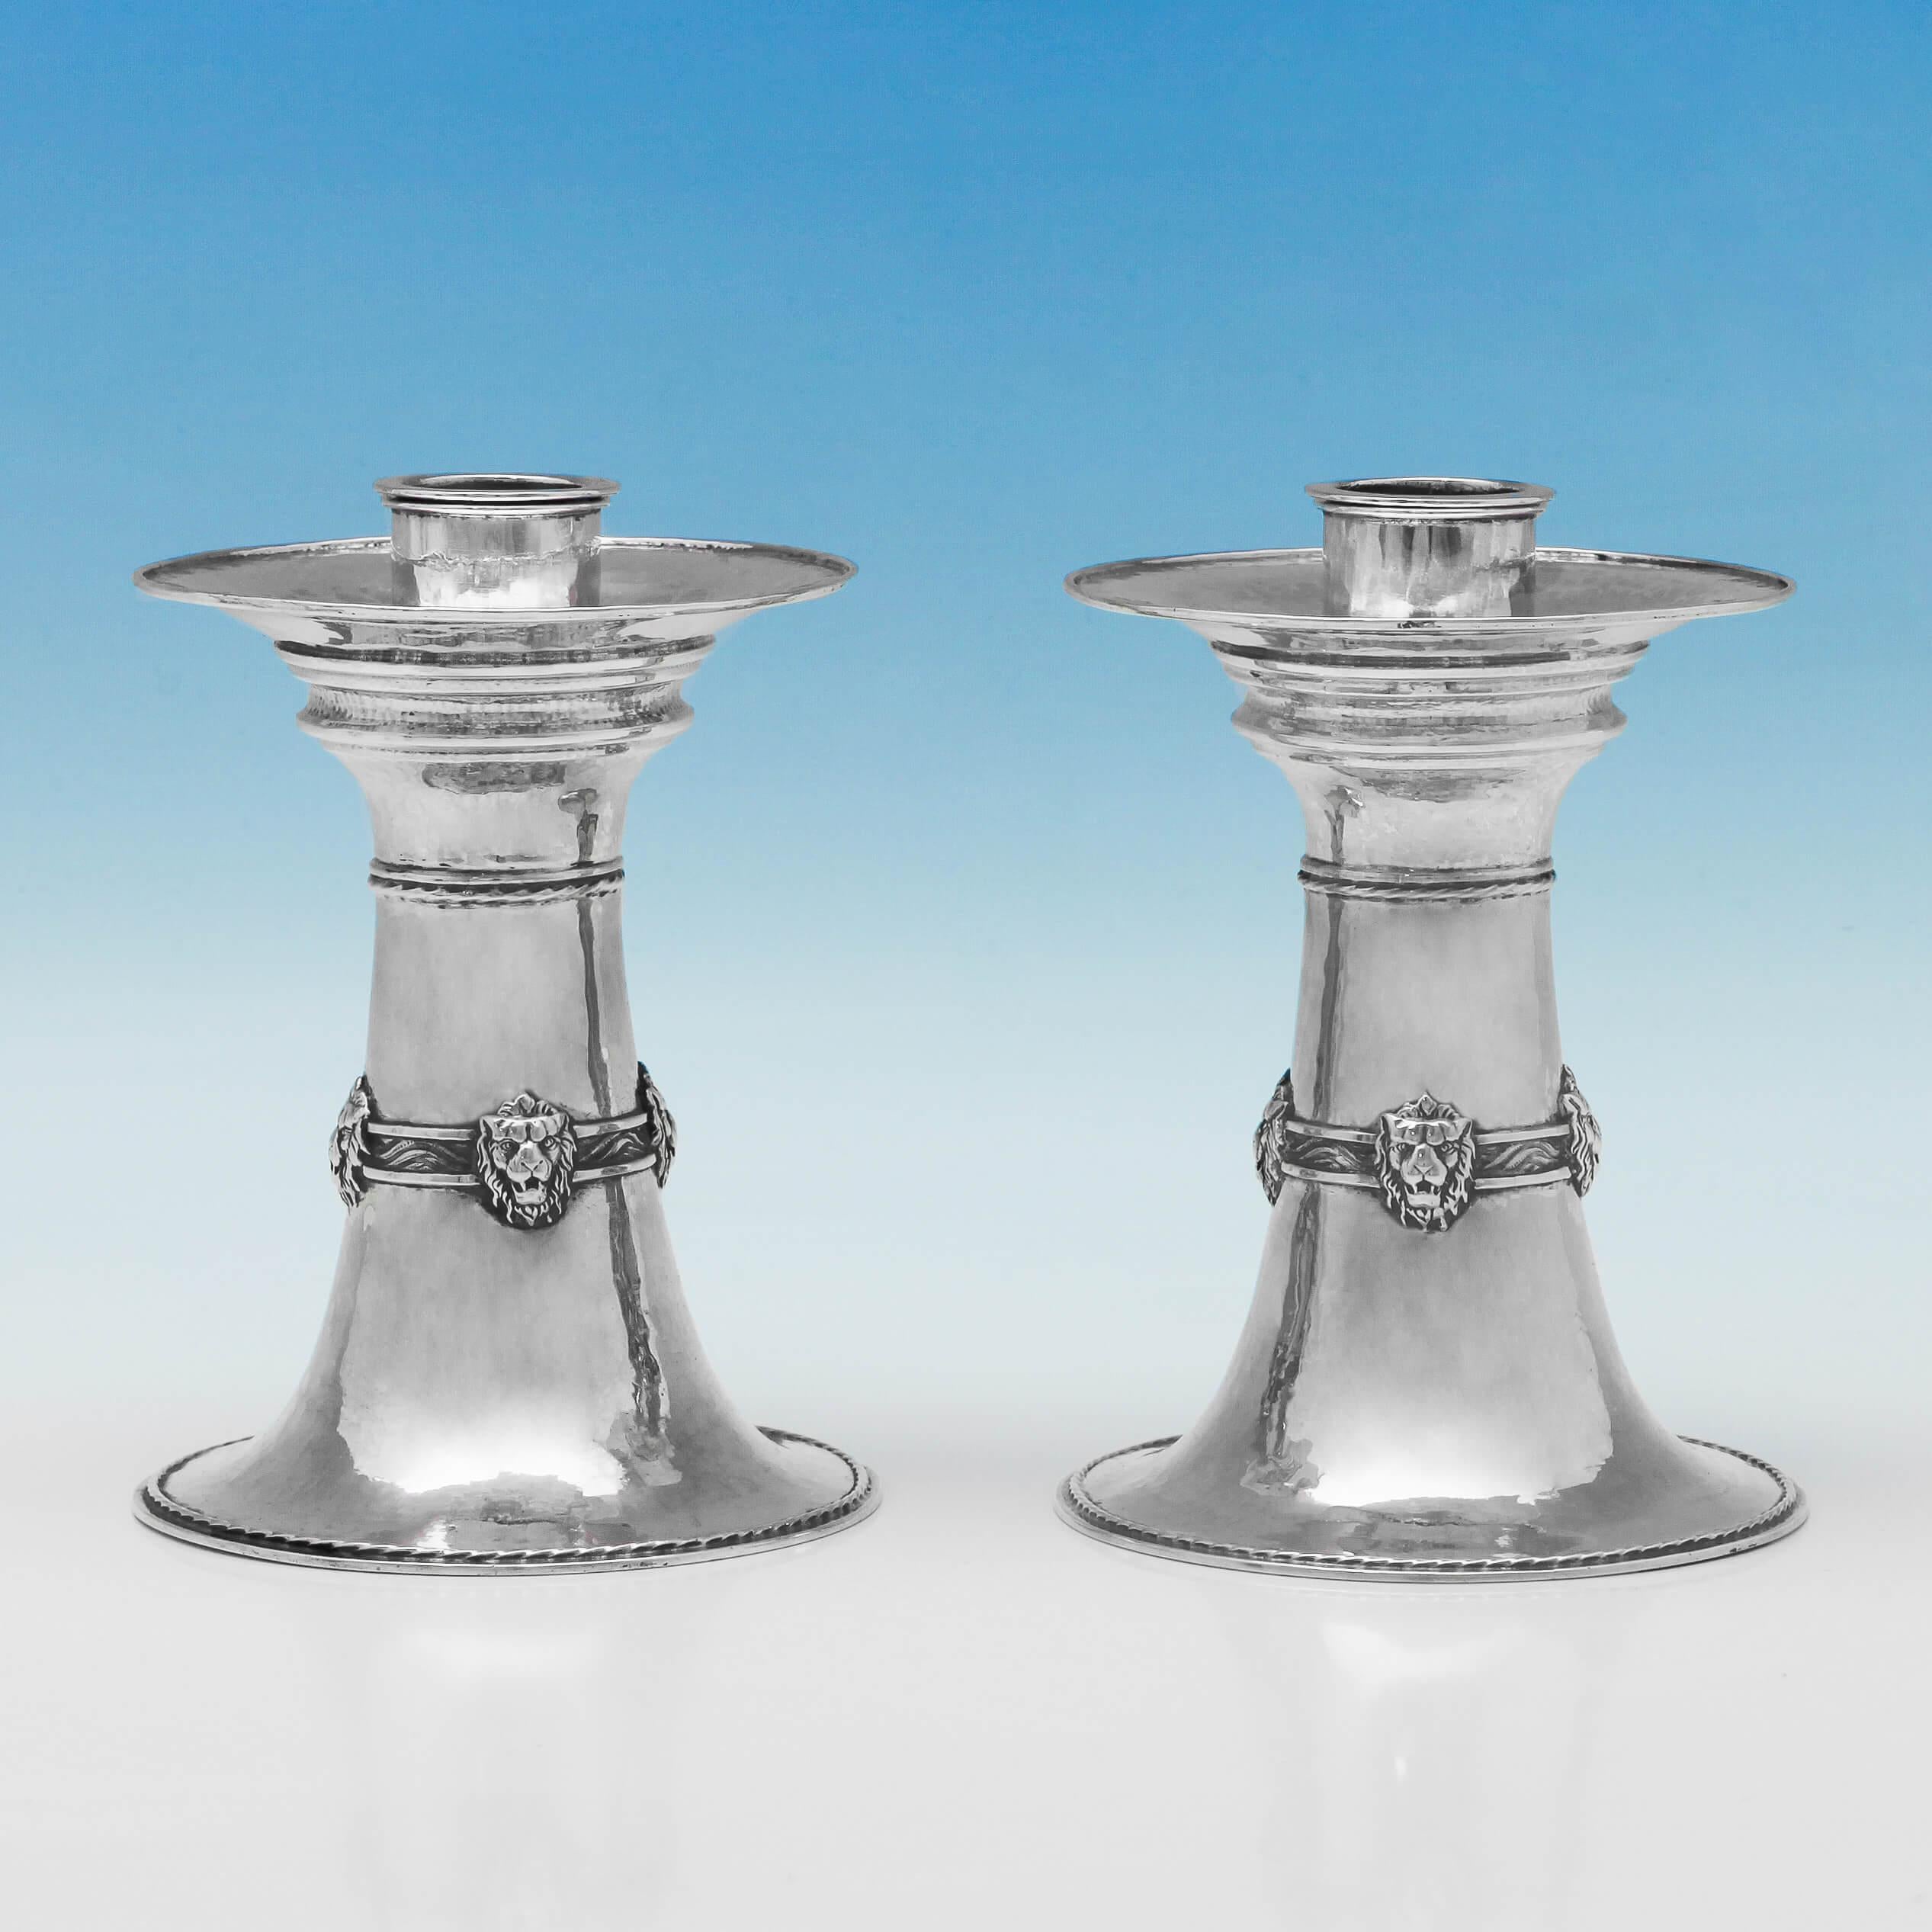 Hallmarked in London in 1924 by Omar Ramsden, this magnificent pair of sterling silver candlesticks, have a hand-hammered finish, and feature lion mask decoration and rope detailing. The base of each candlestick is engraved “Omar Ramsden Me Fecit”.